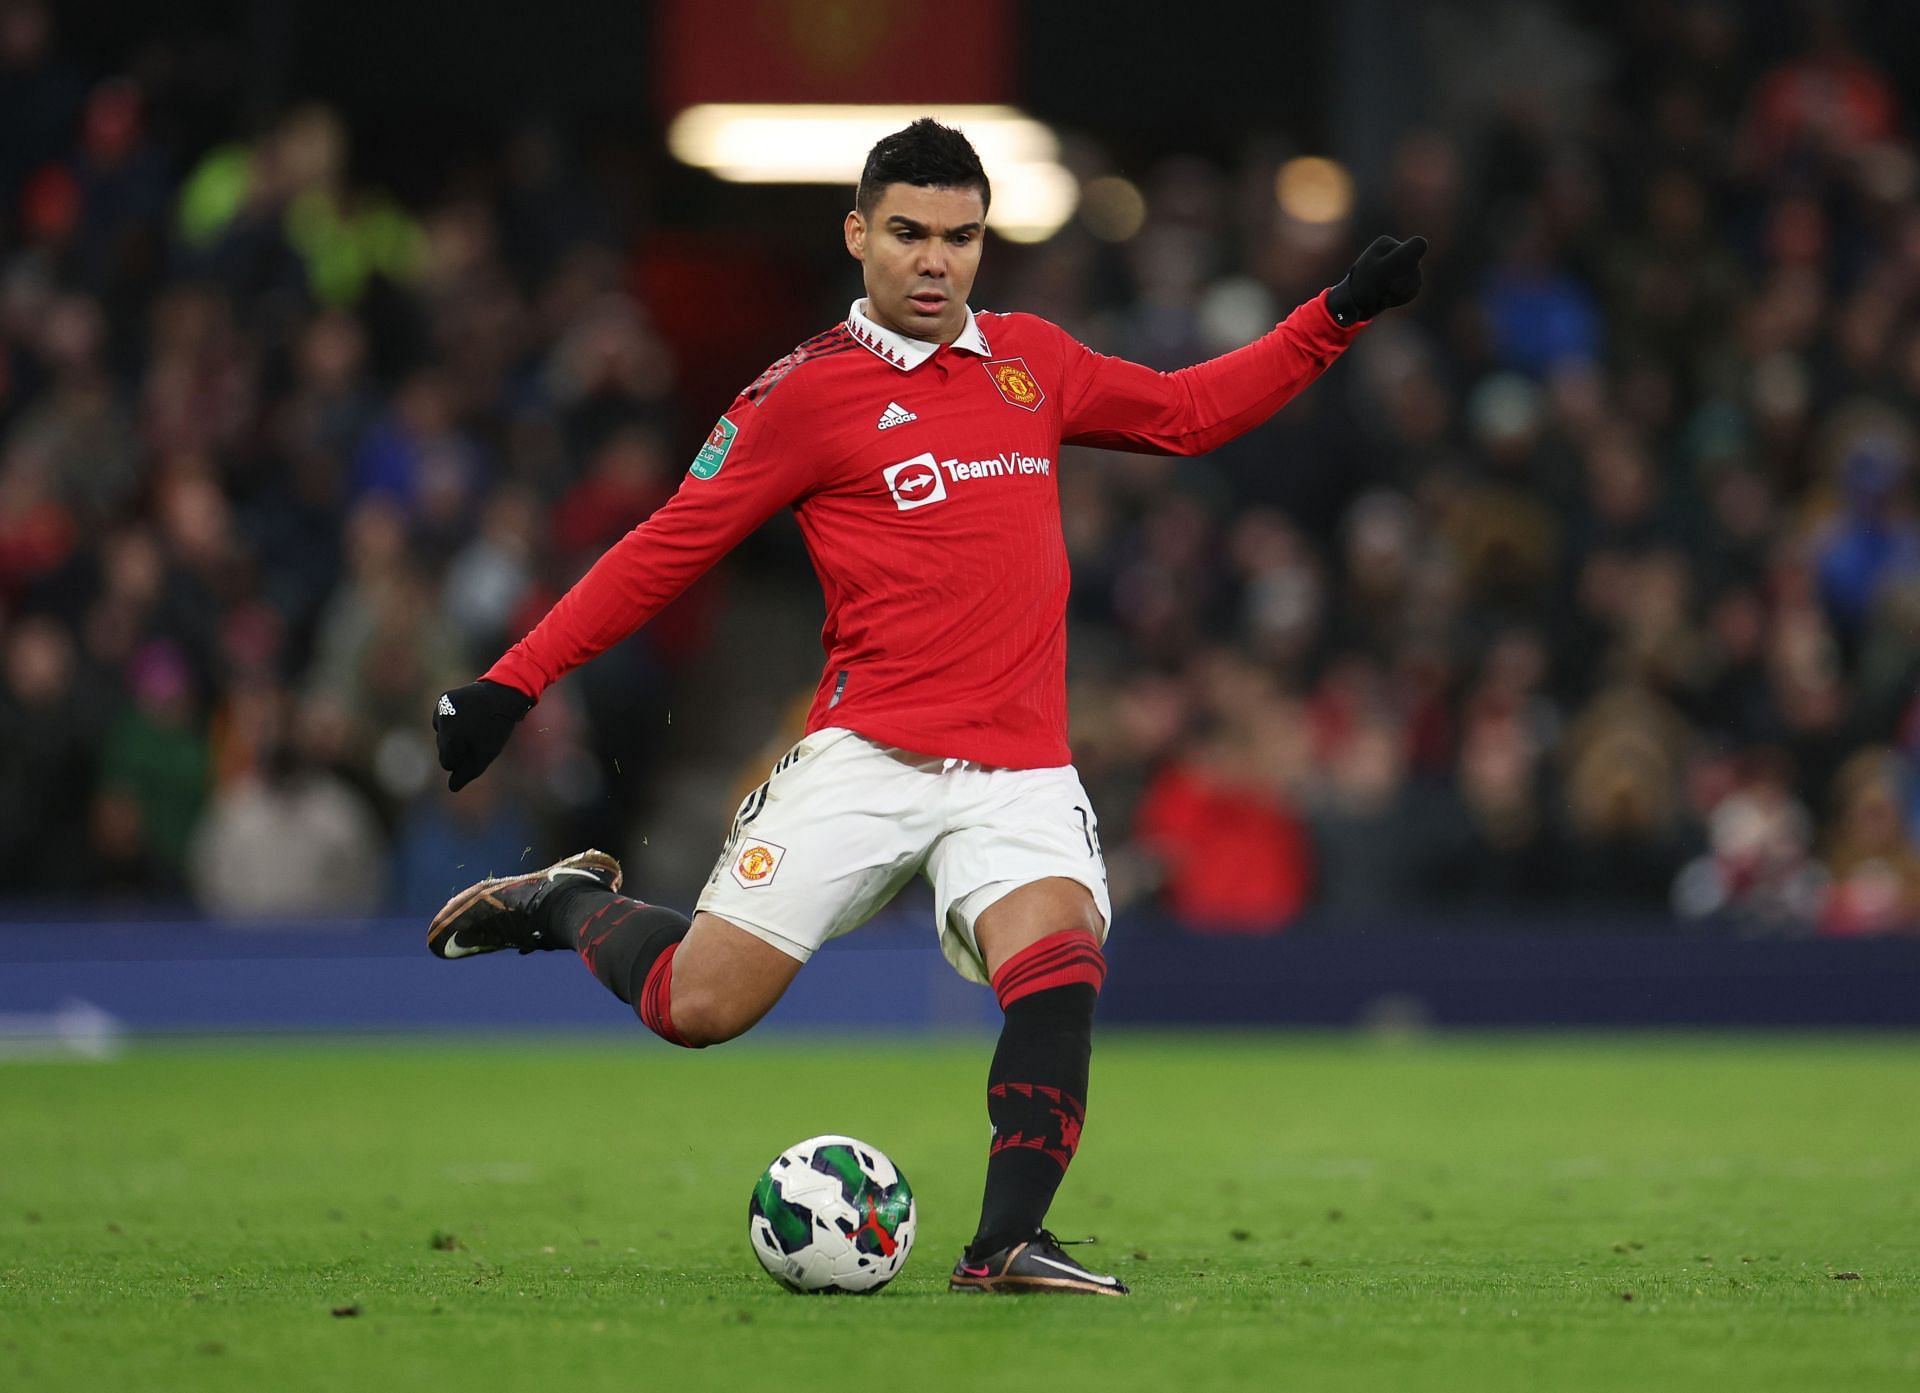 Casemiro has hit the ground running since arriving at Manchester United last year.